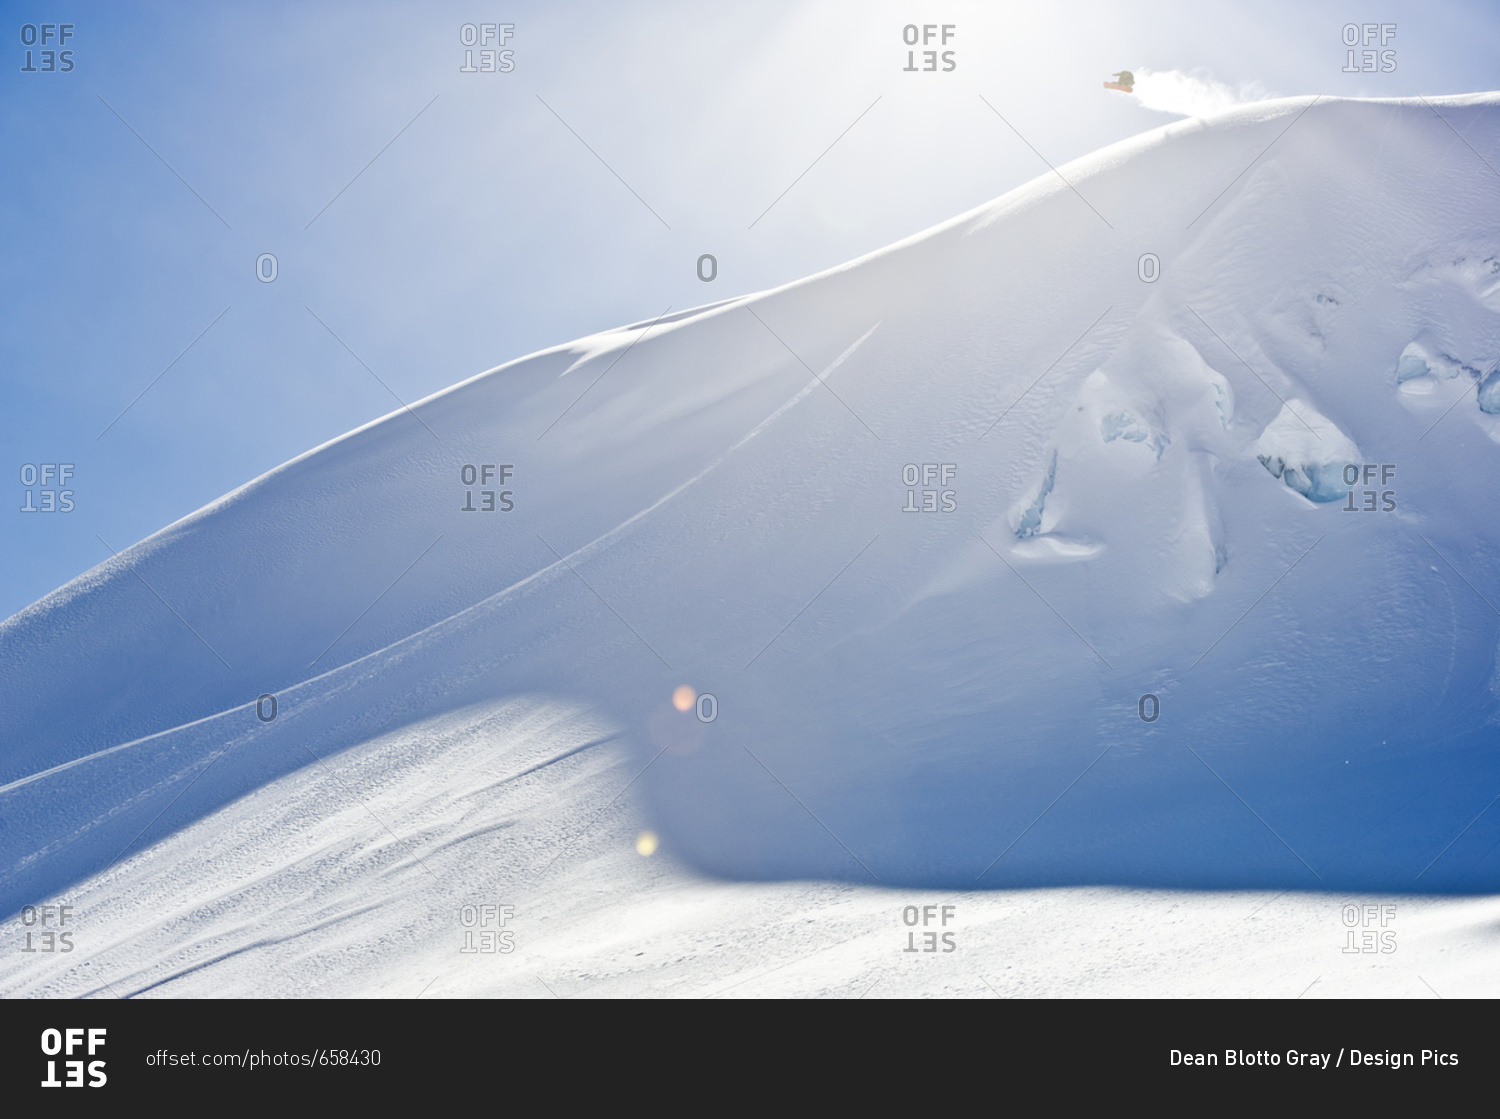 A professional, freeriding snowboarder in mid-air on a snowy slope against a blue sky; British Columbia, Canada